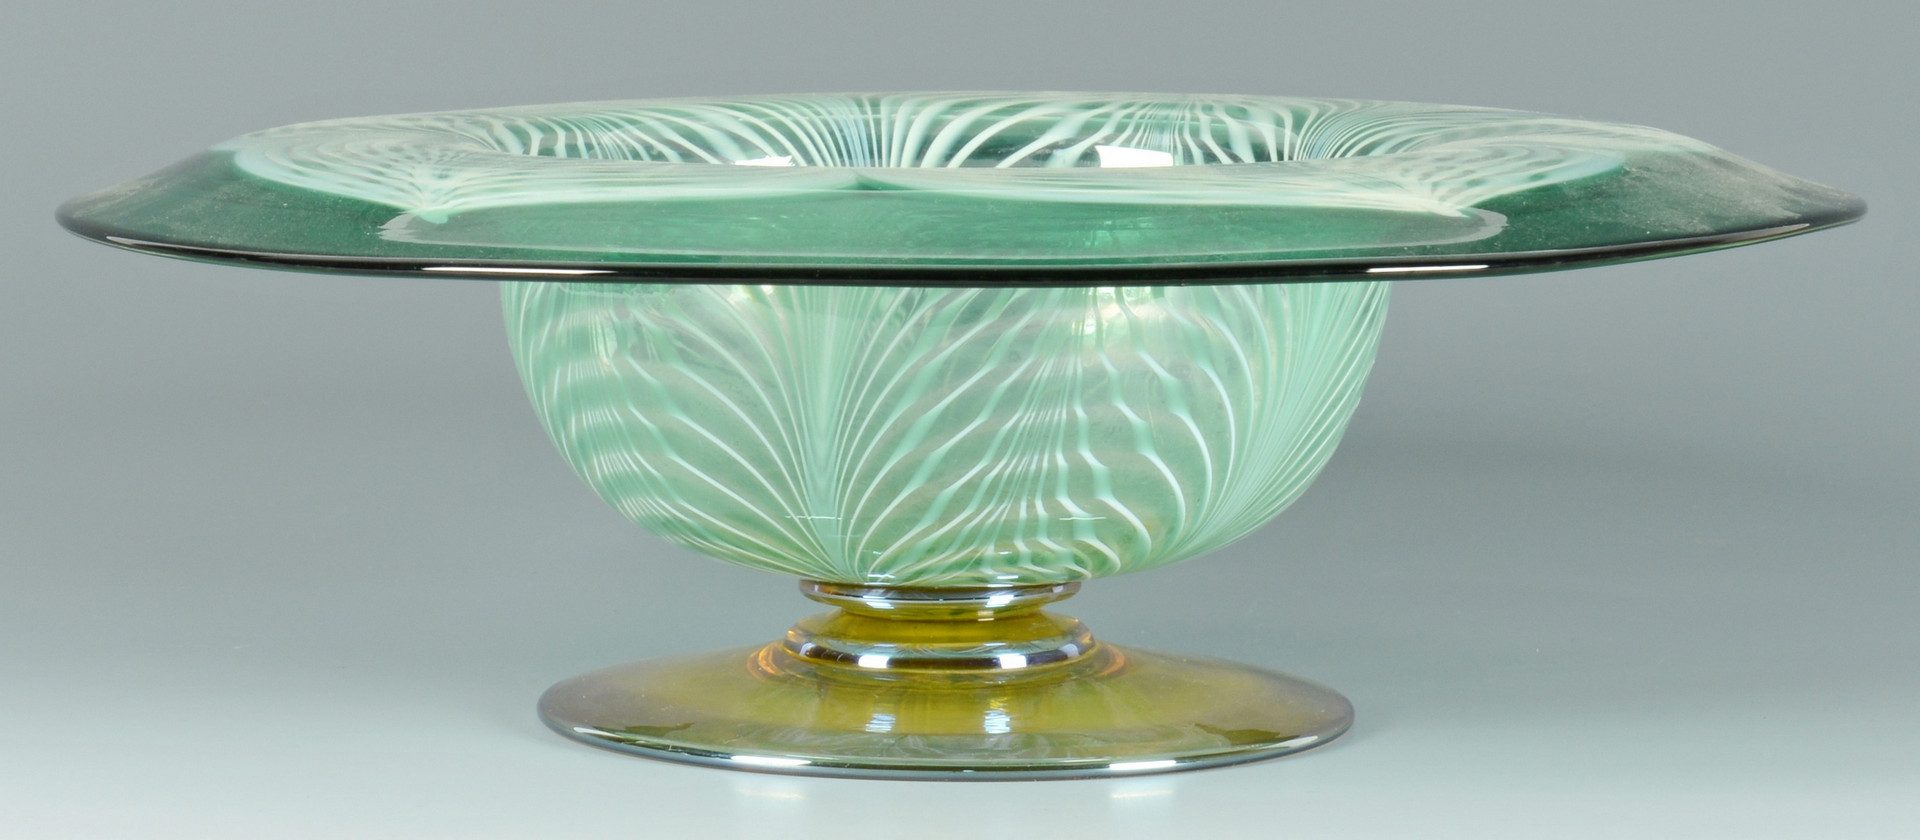 Lot 502: Large Durand Peacock Feather Compote